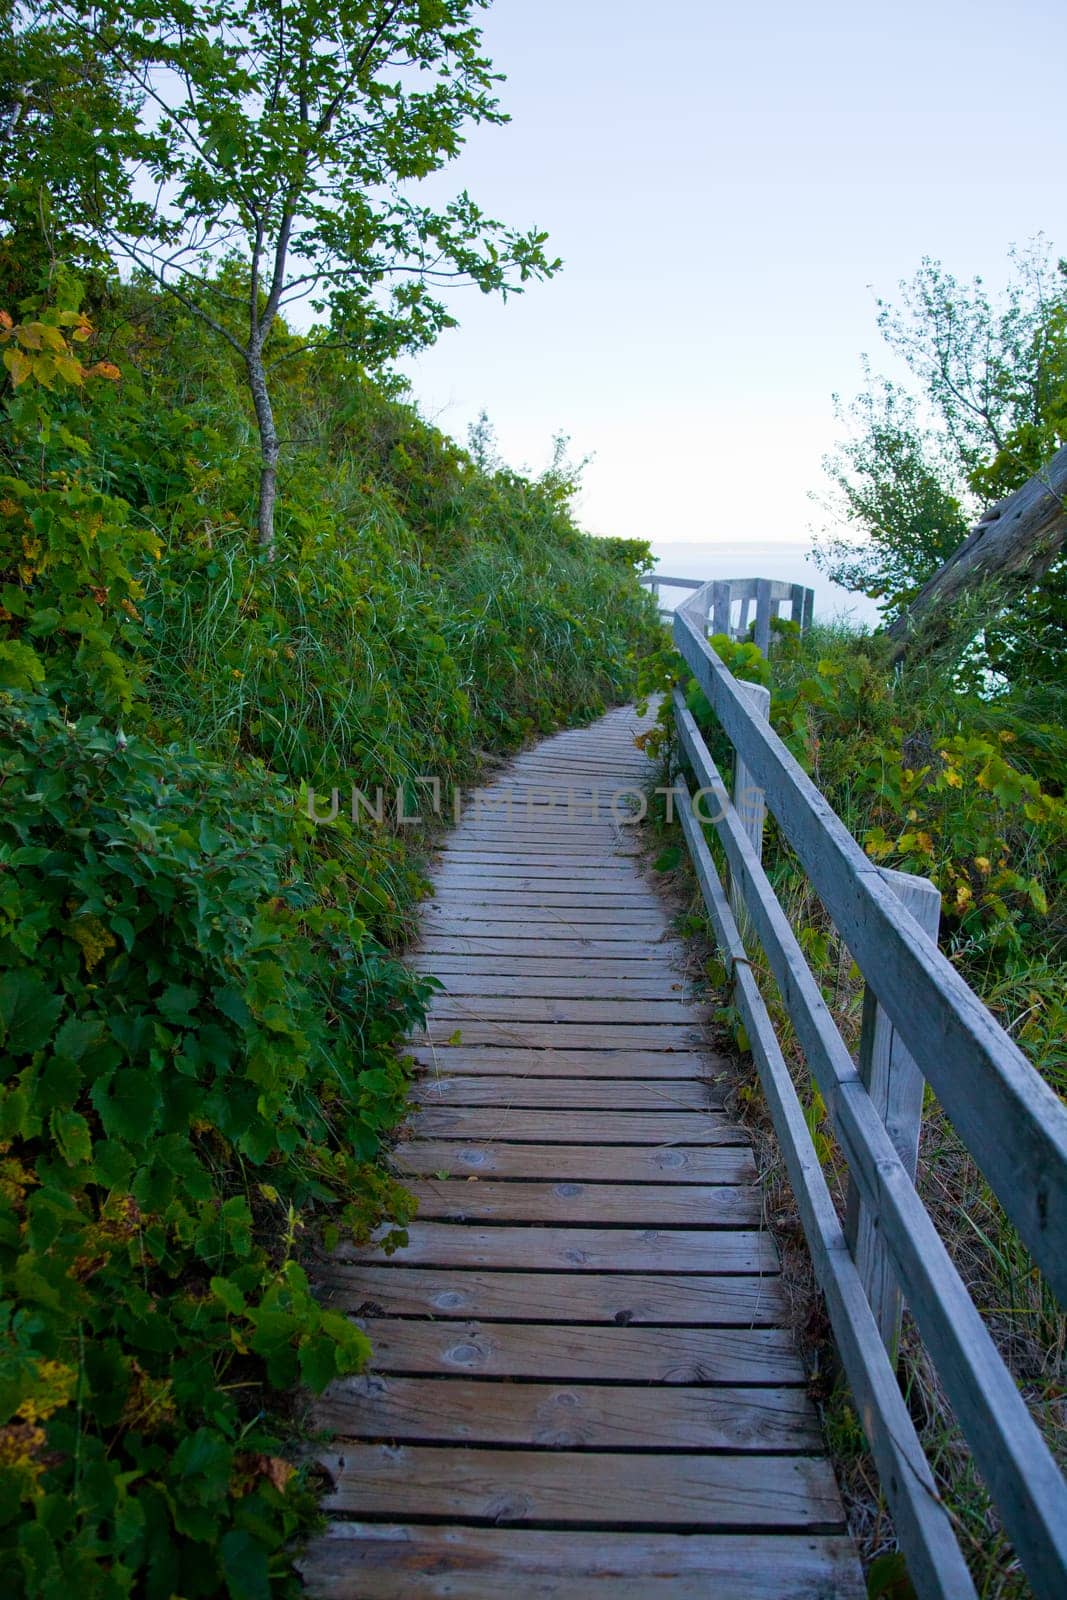 Tranquil Dawn on Rustic Boardwalk in Lush Michigan Wilderness by njproductions